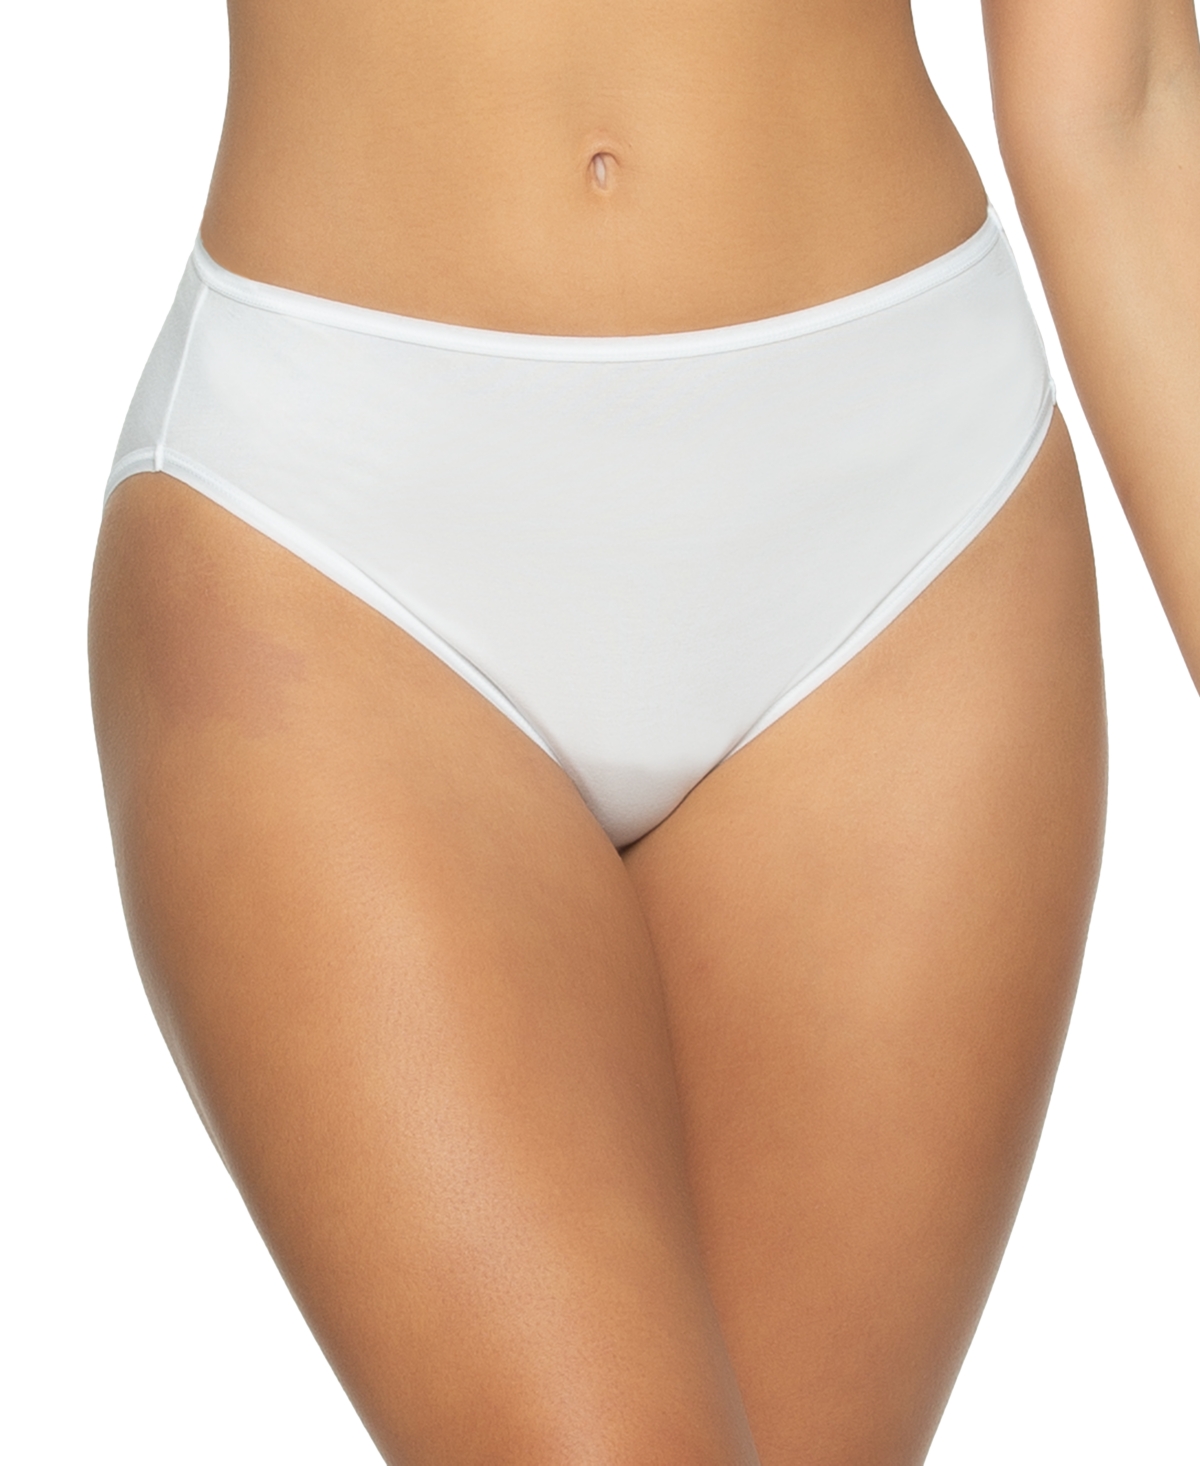 Paramour Women's 5-pk. High-leg Underwear 630180p5, Created For Macy's In Wmn,wht,br